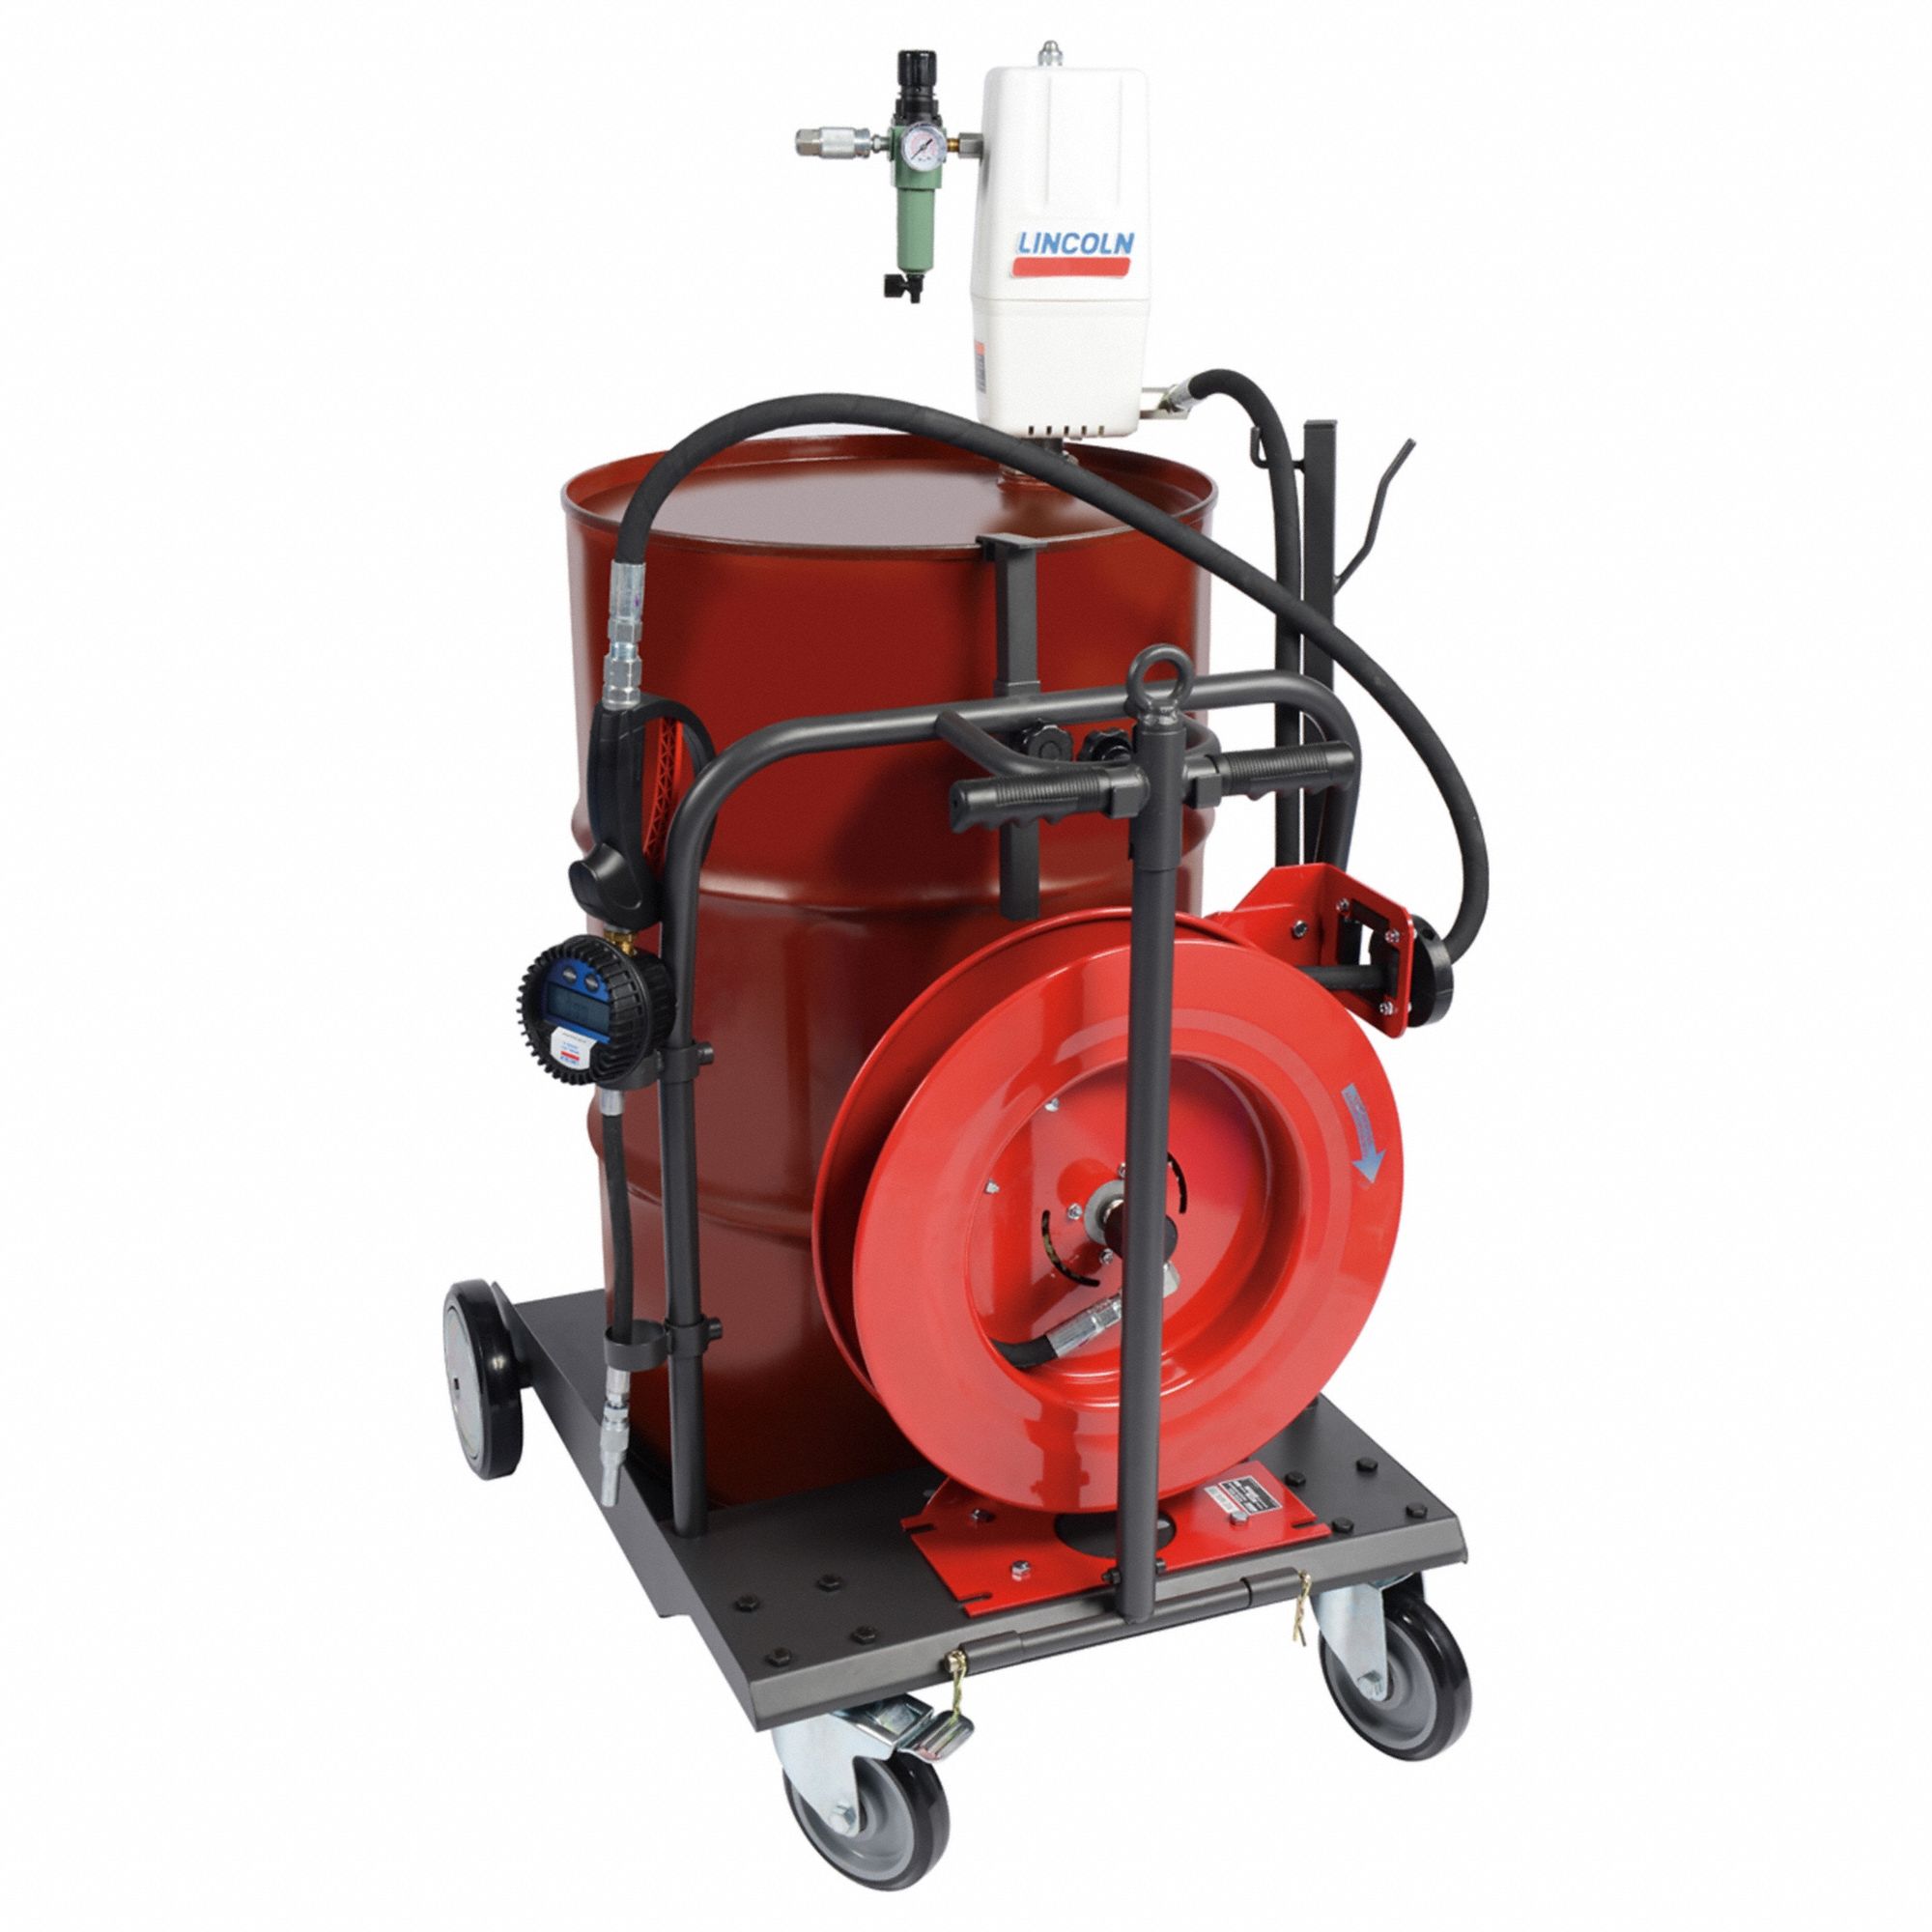 LINCOLN PORTABLE GREASE PUMP,400 LB/55 GAL DRUM - Air-Operated